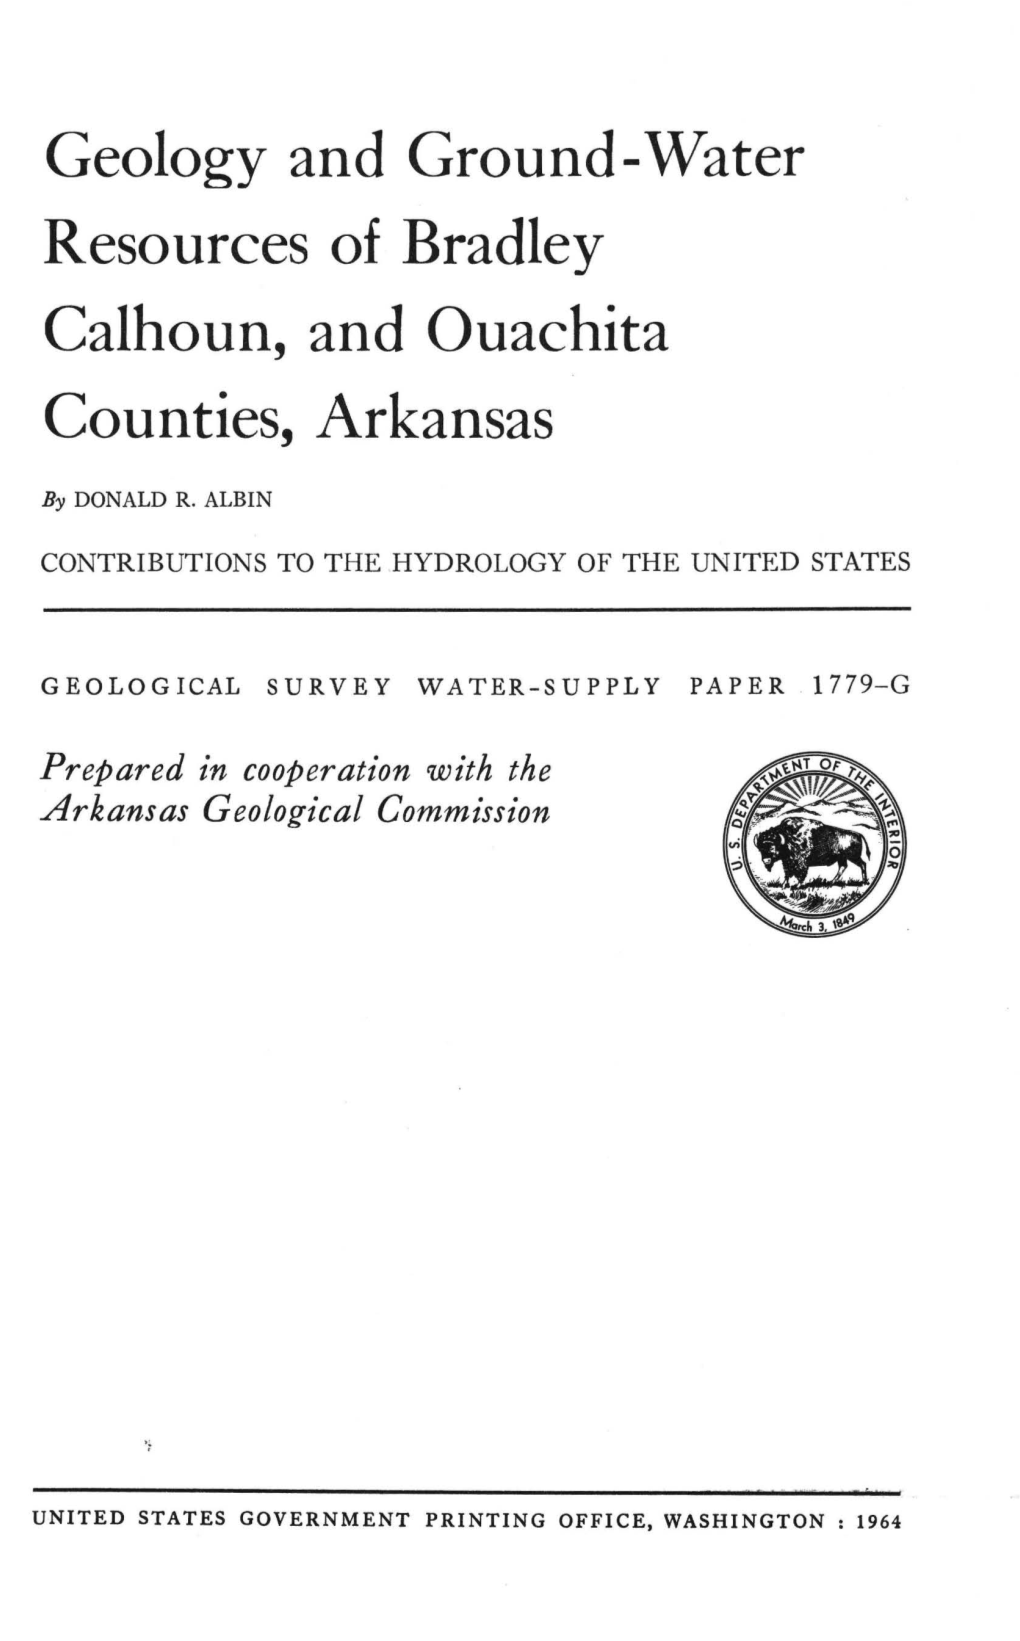 Geology and Ground-Water Resources of Bradley Calhoun, and Ouachita Counties, Arkansas